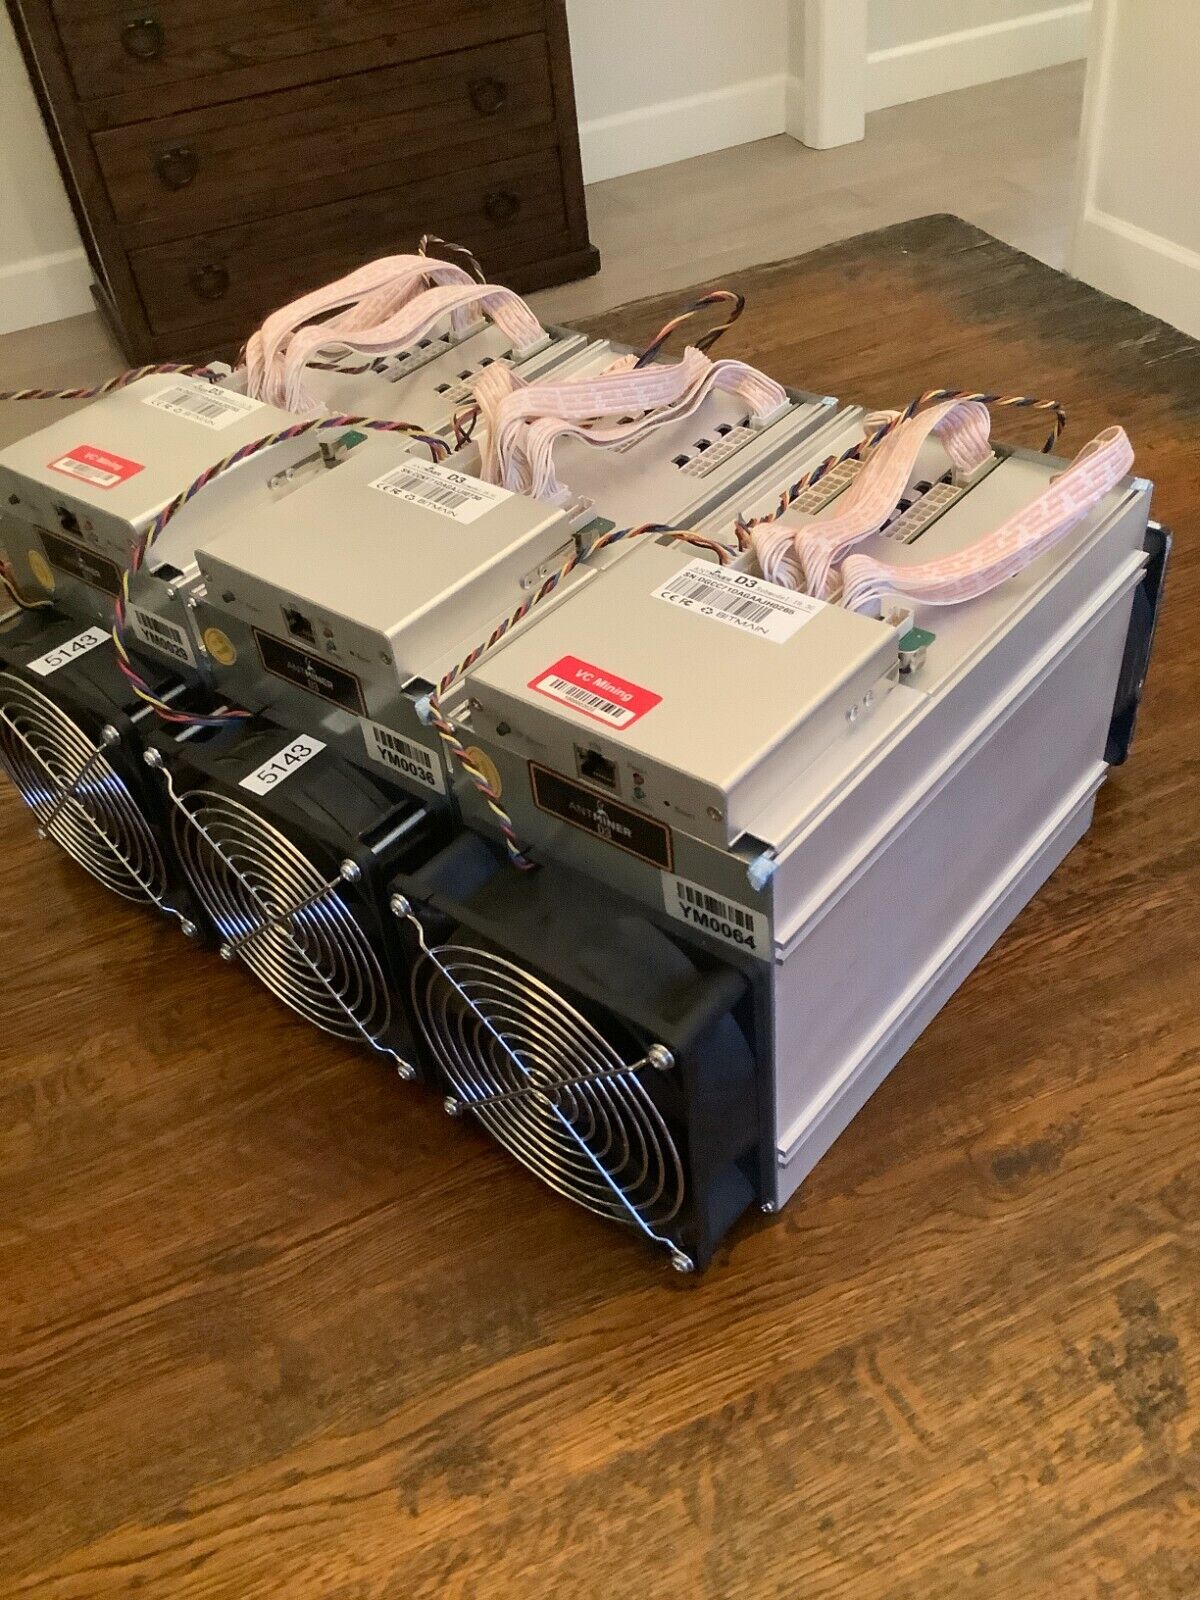 Bitmain Antminer D3 Lot of 3  19.3 GHs X11 DASH Miner w/ APW3++ PSU Power Supply